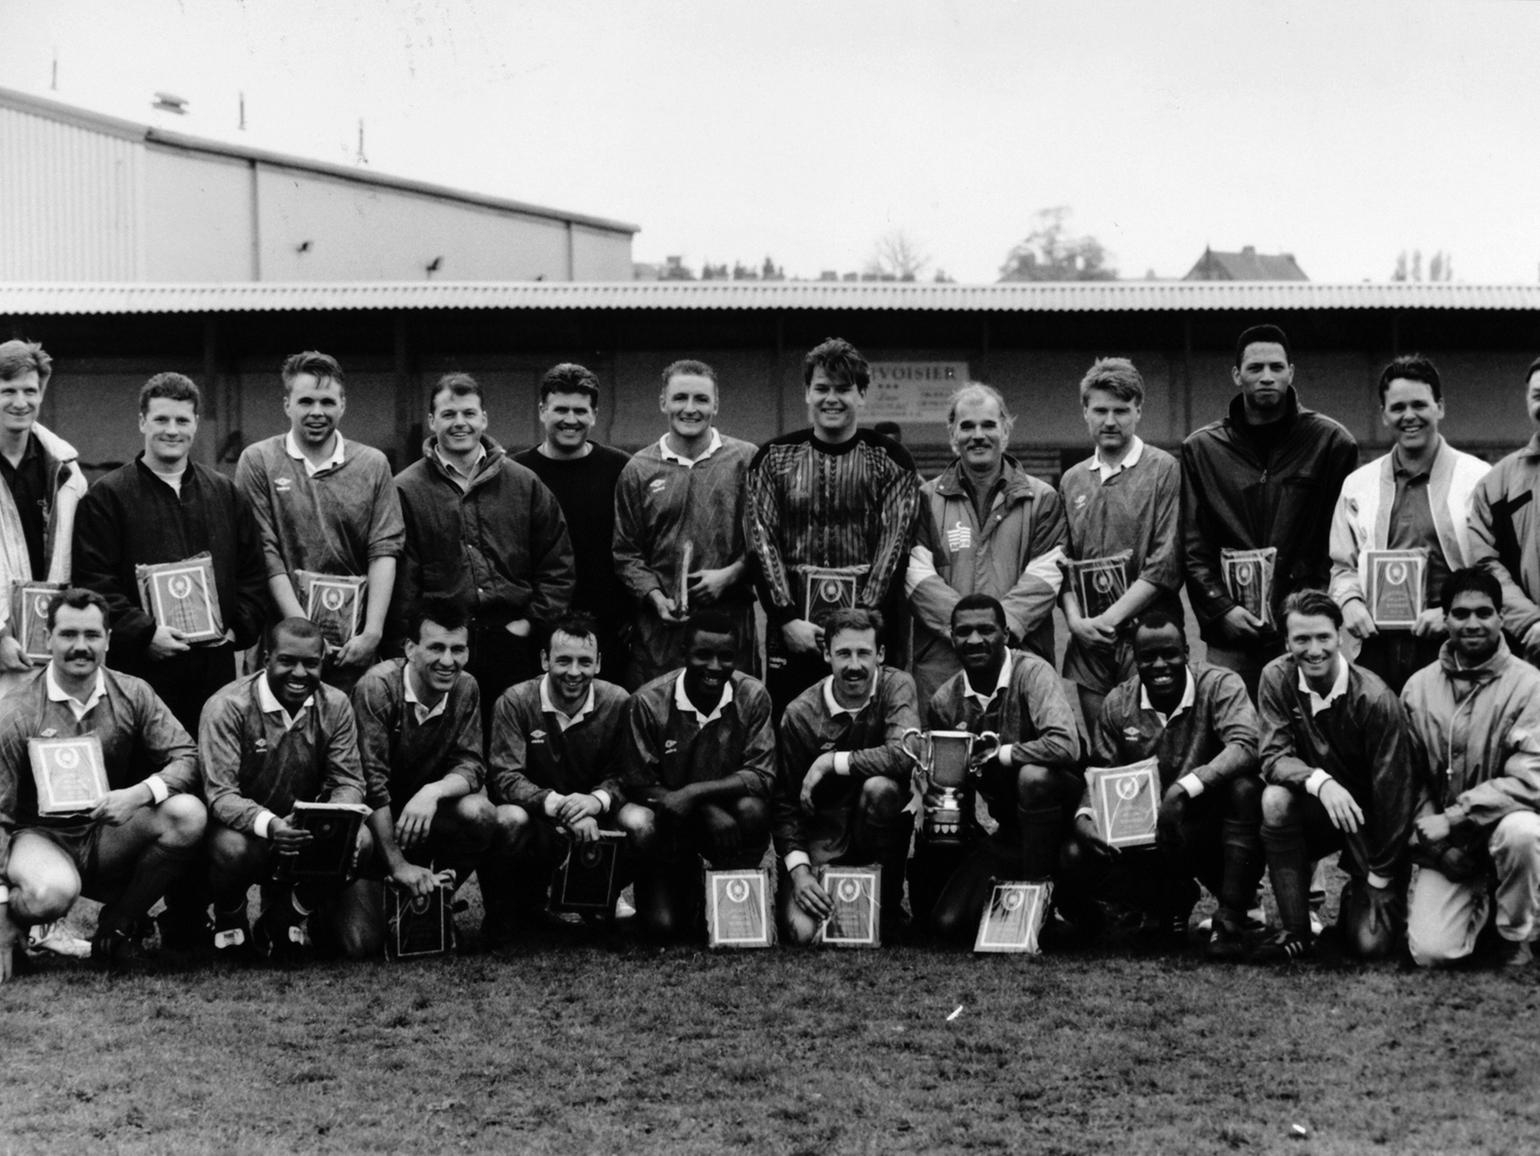 Beulah made it a Leeds Combination league and cup double when they beat Fforde Grene 2-0 in the Sanford Cup Final at Farsley Celtic. They were also the winners of the Jubilee Premier Division.